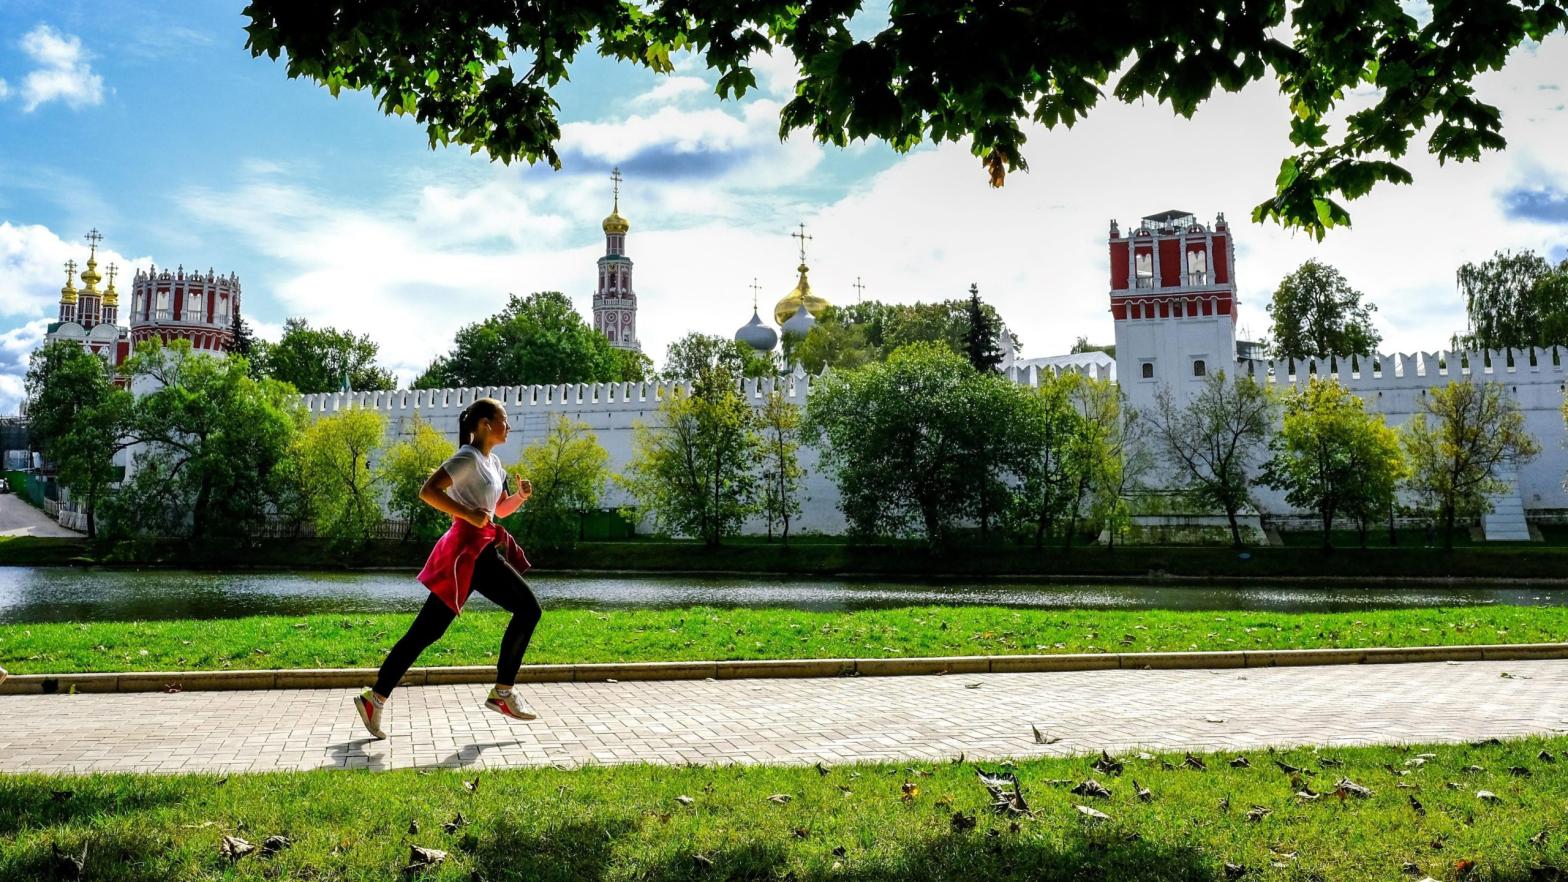 A woman jogs near the Novodevichy Convent in central Moscow on September 14, 2020.  (Image: Yuri Kadobnov/AFP, Getty Images)